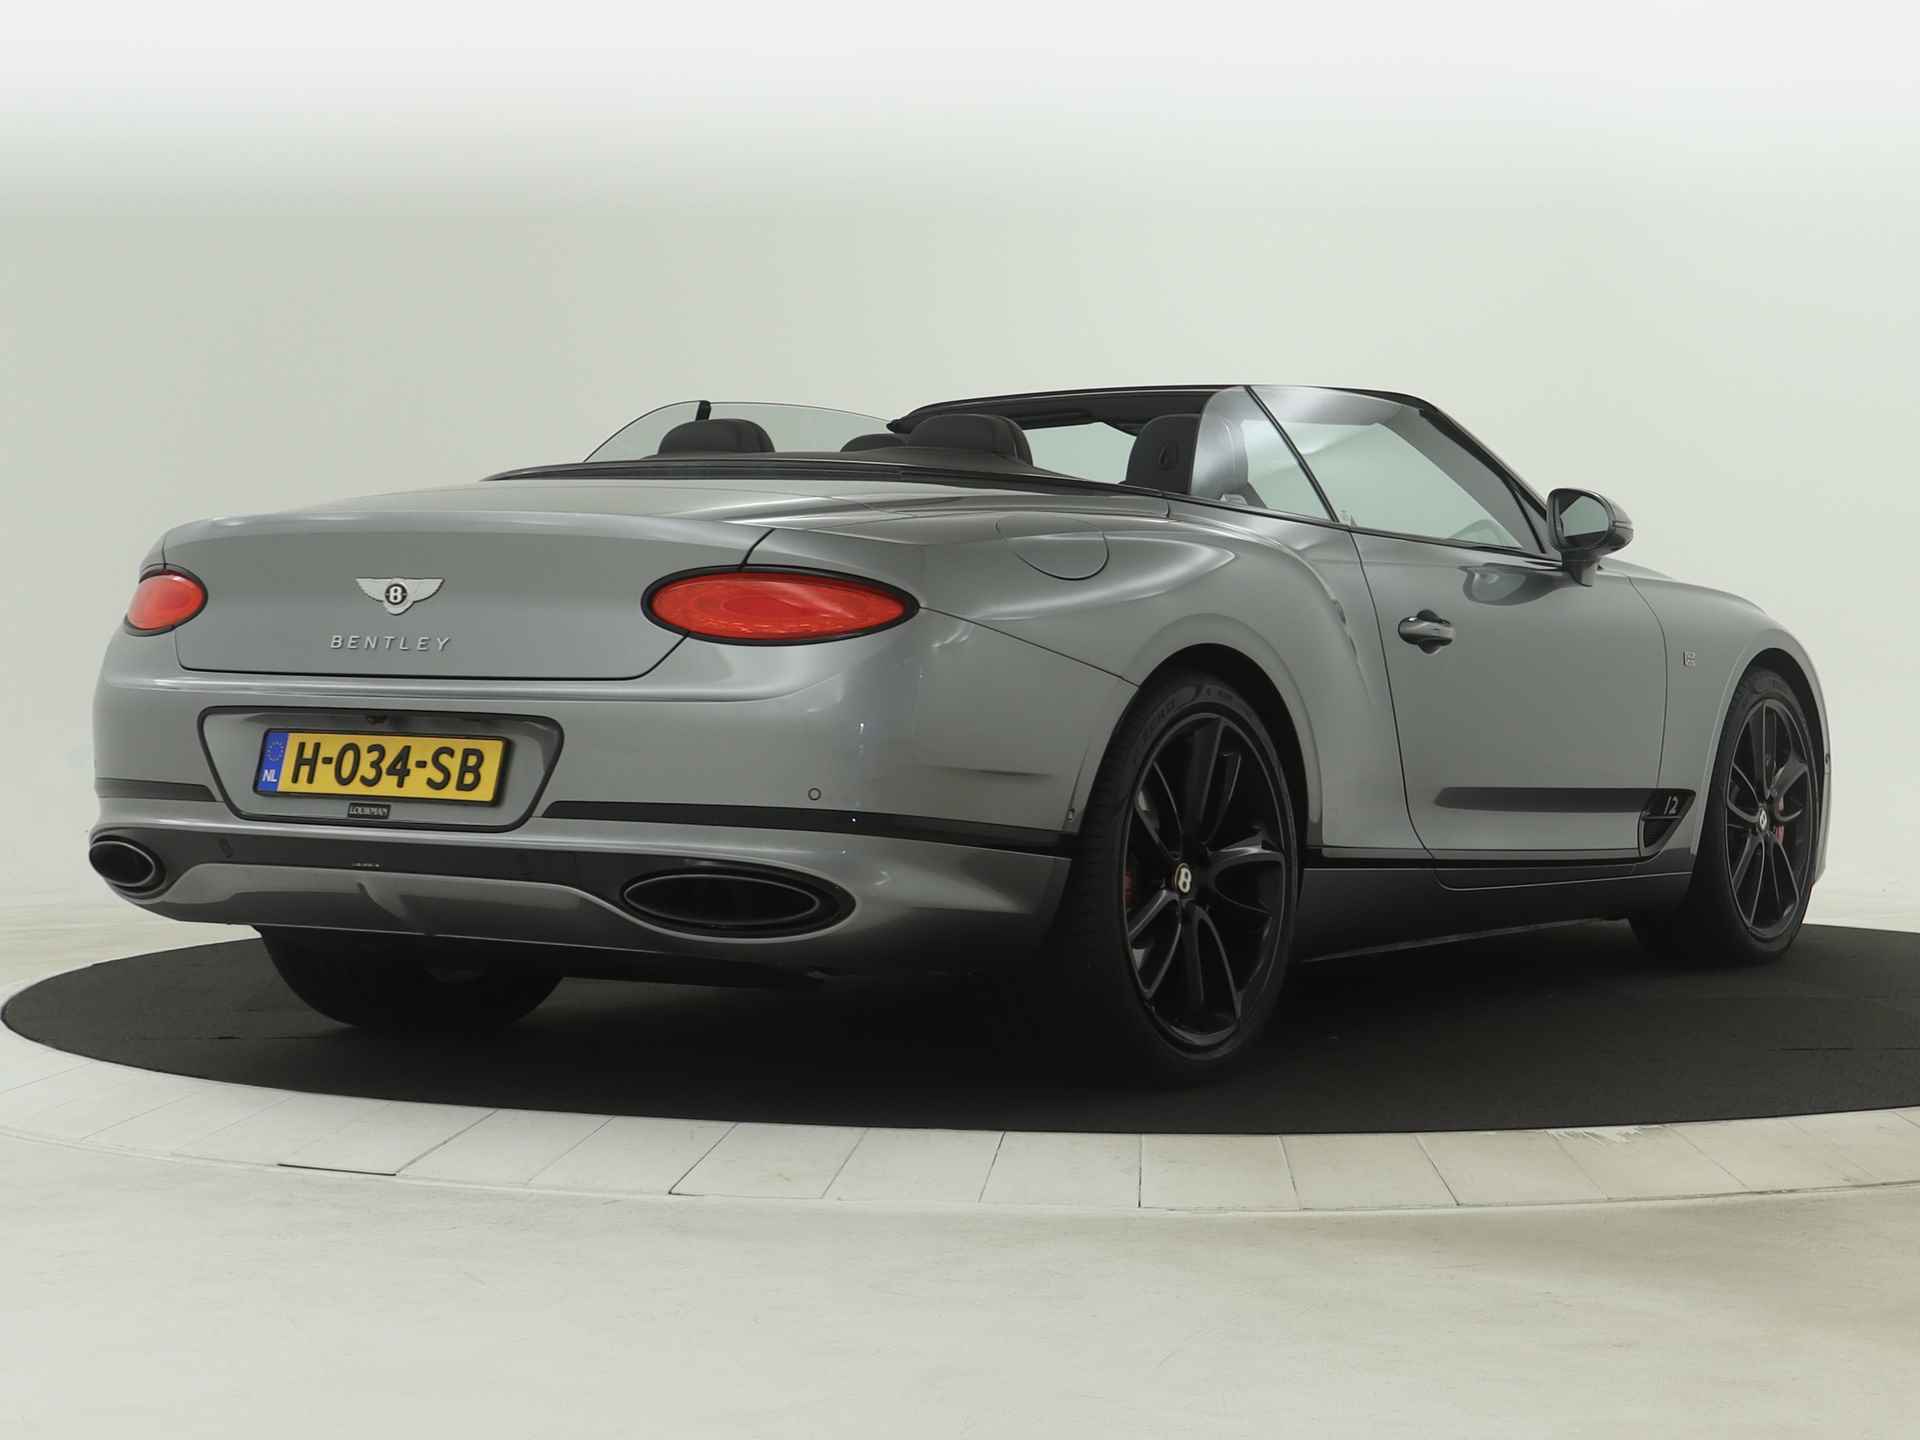 Bentley Continental GTC 6.0 W12 First Edition Mulliner - Bang & Olufsen - Black package - Massage seats - 3/46